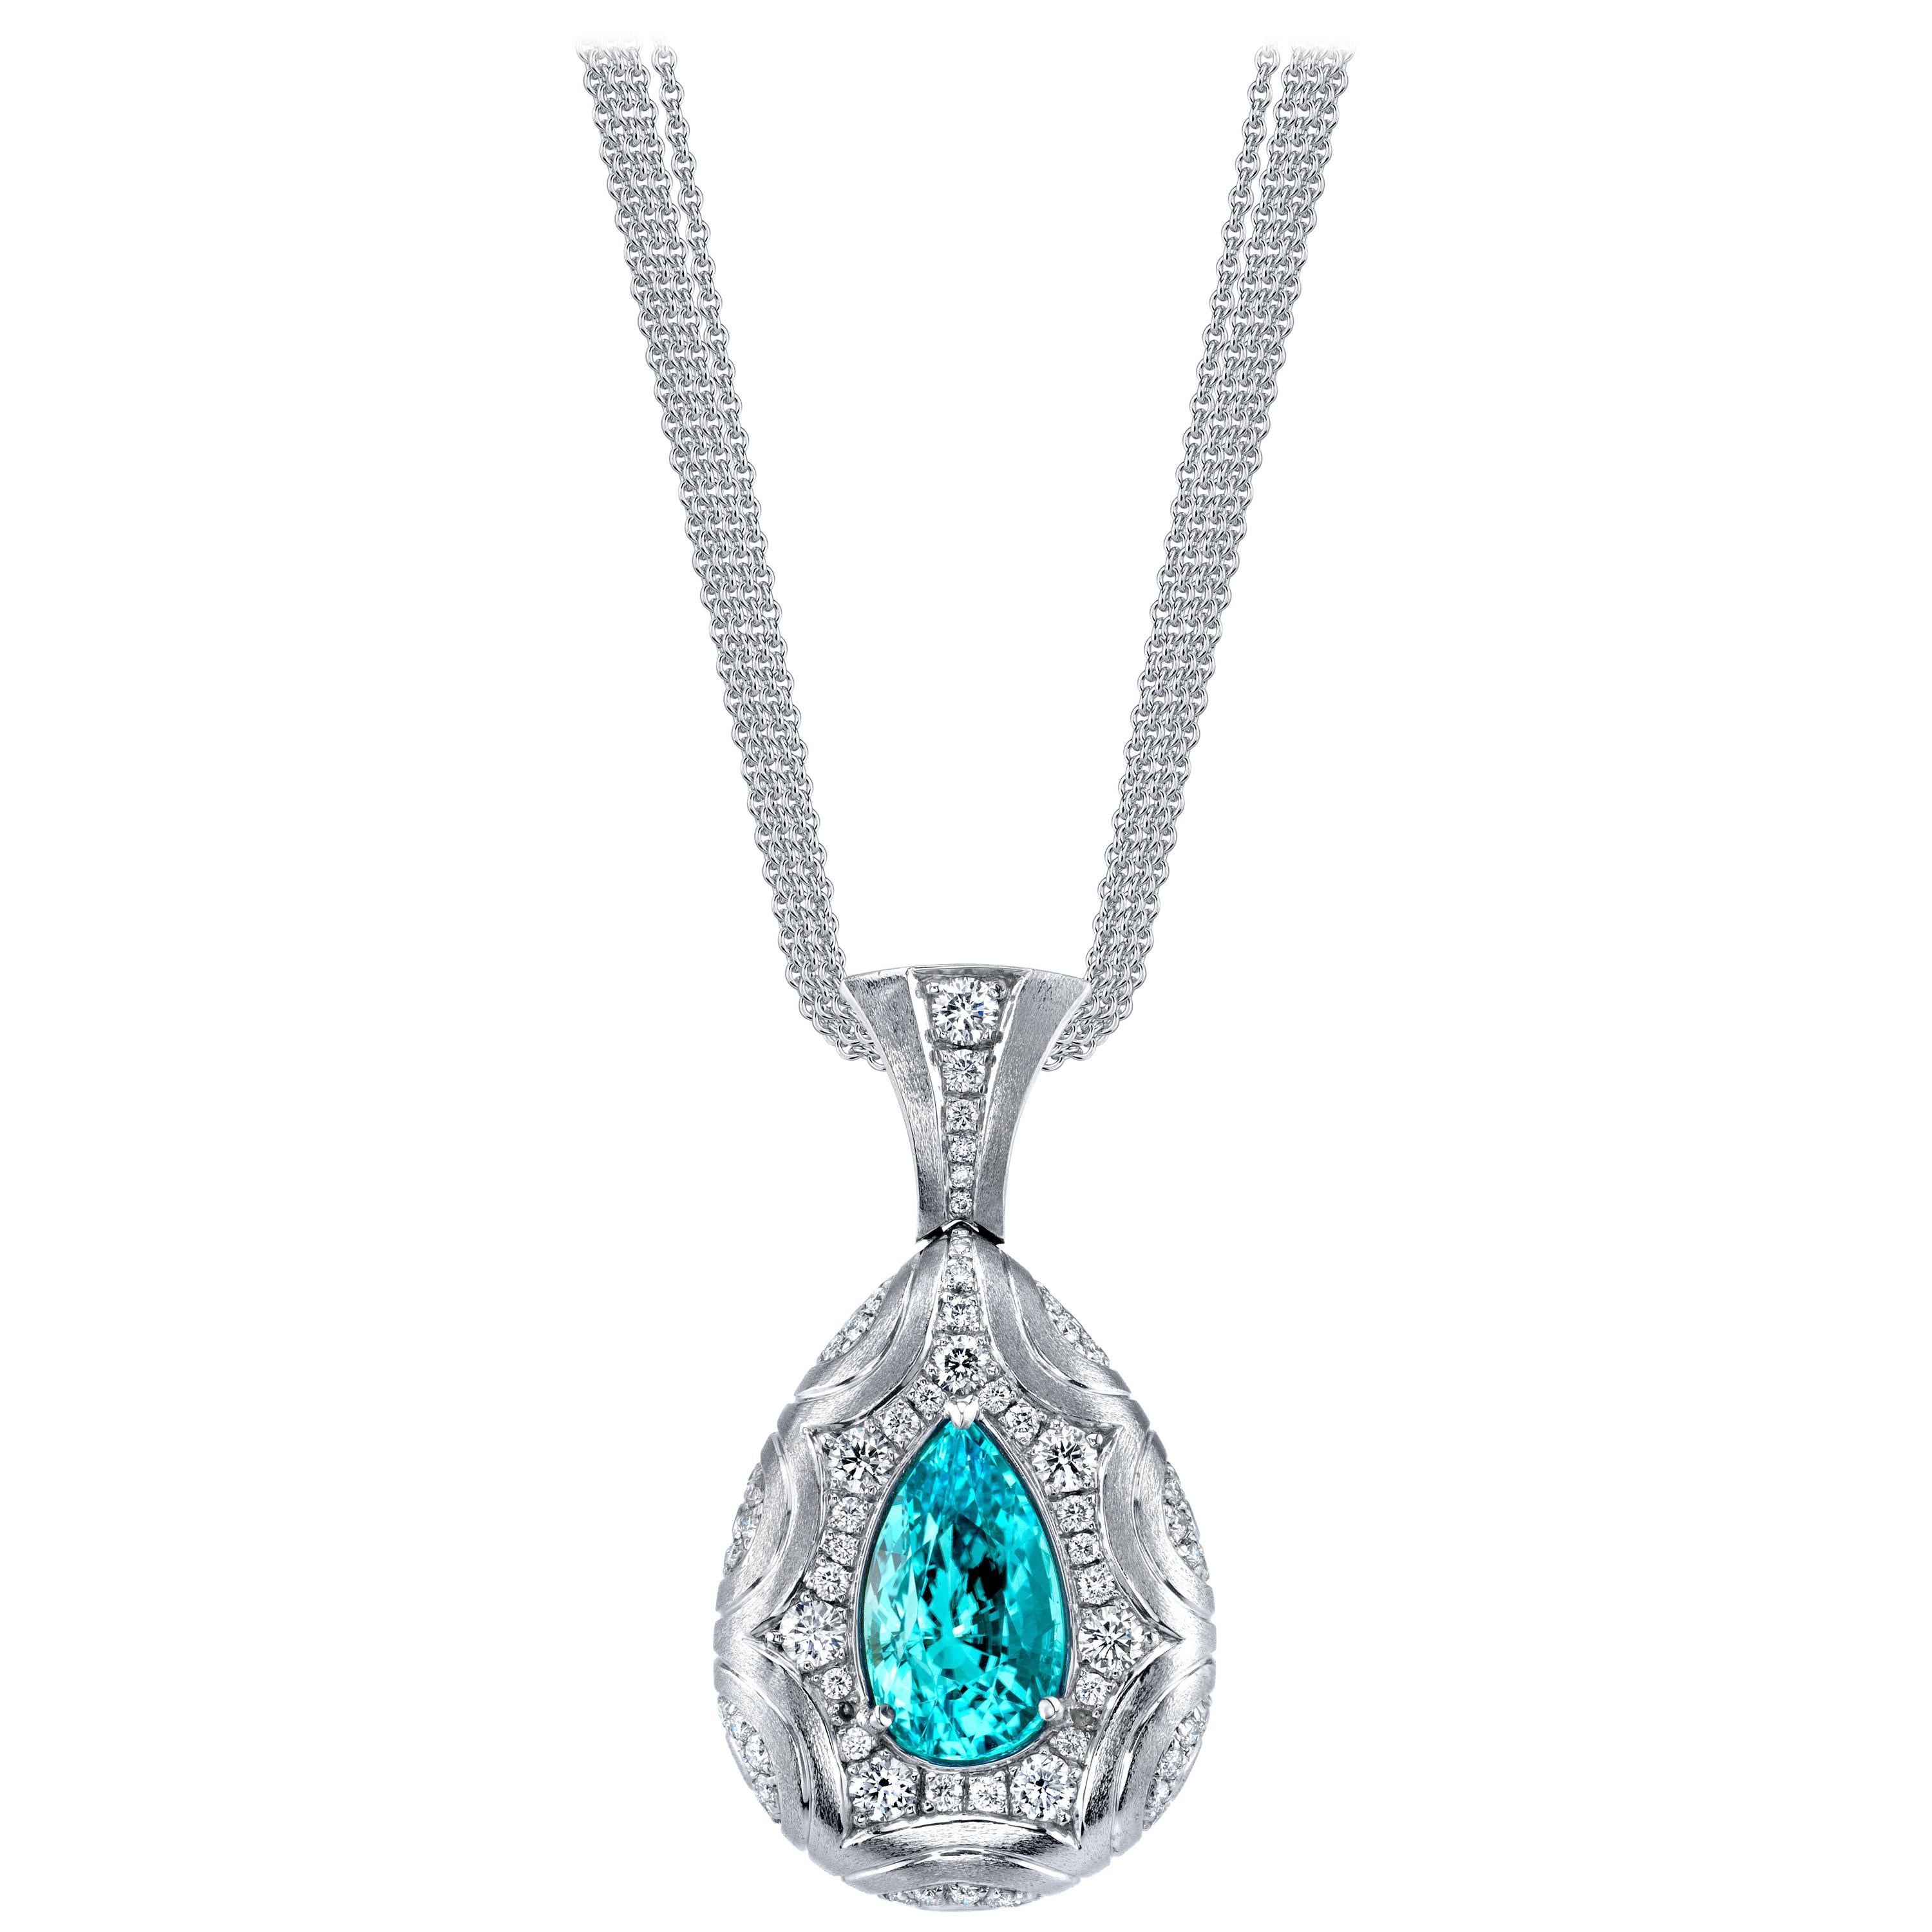 GIA Certified 5.20 Carat Paraiba Tourmaline and Diamond Necklace in White Gold